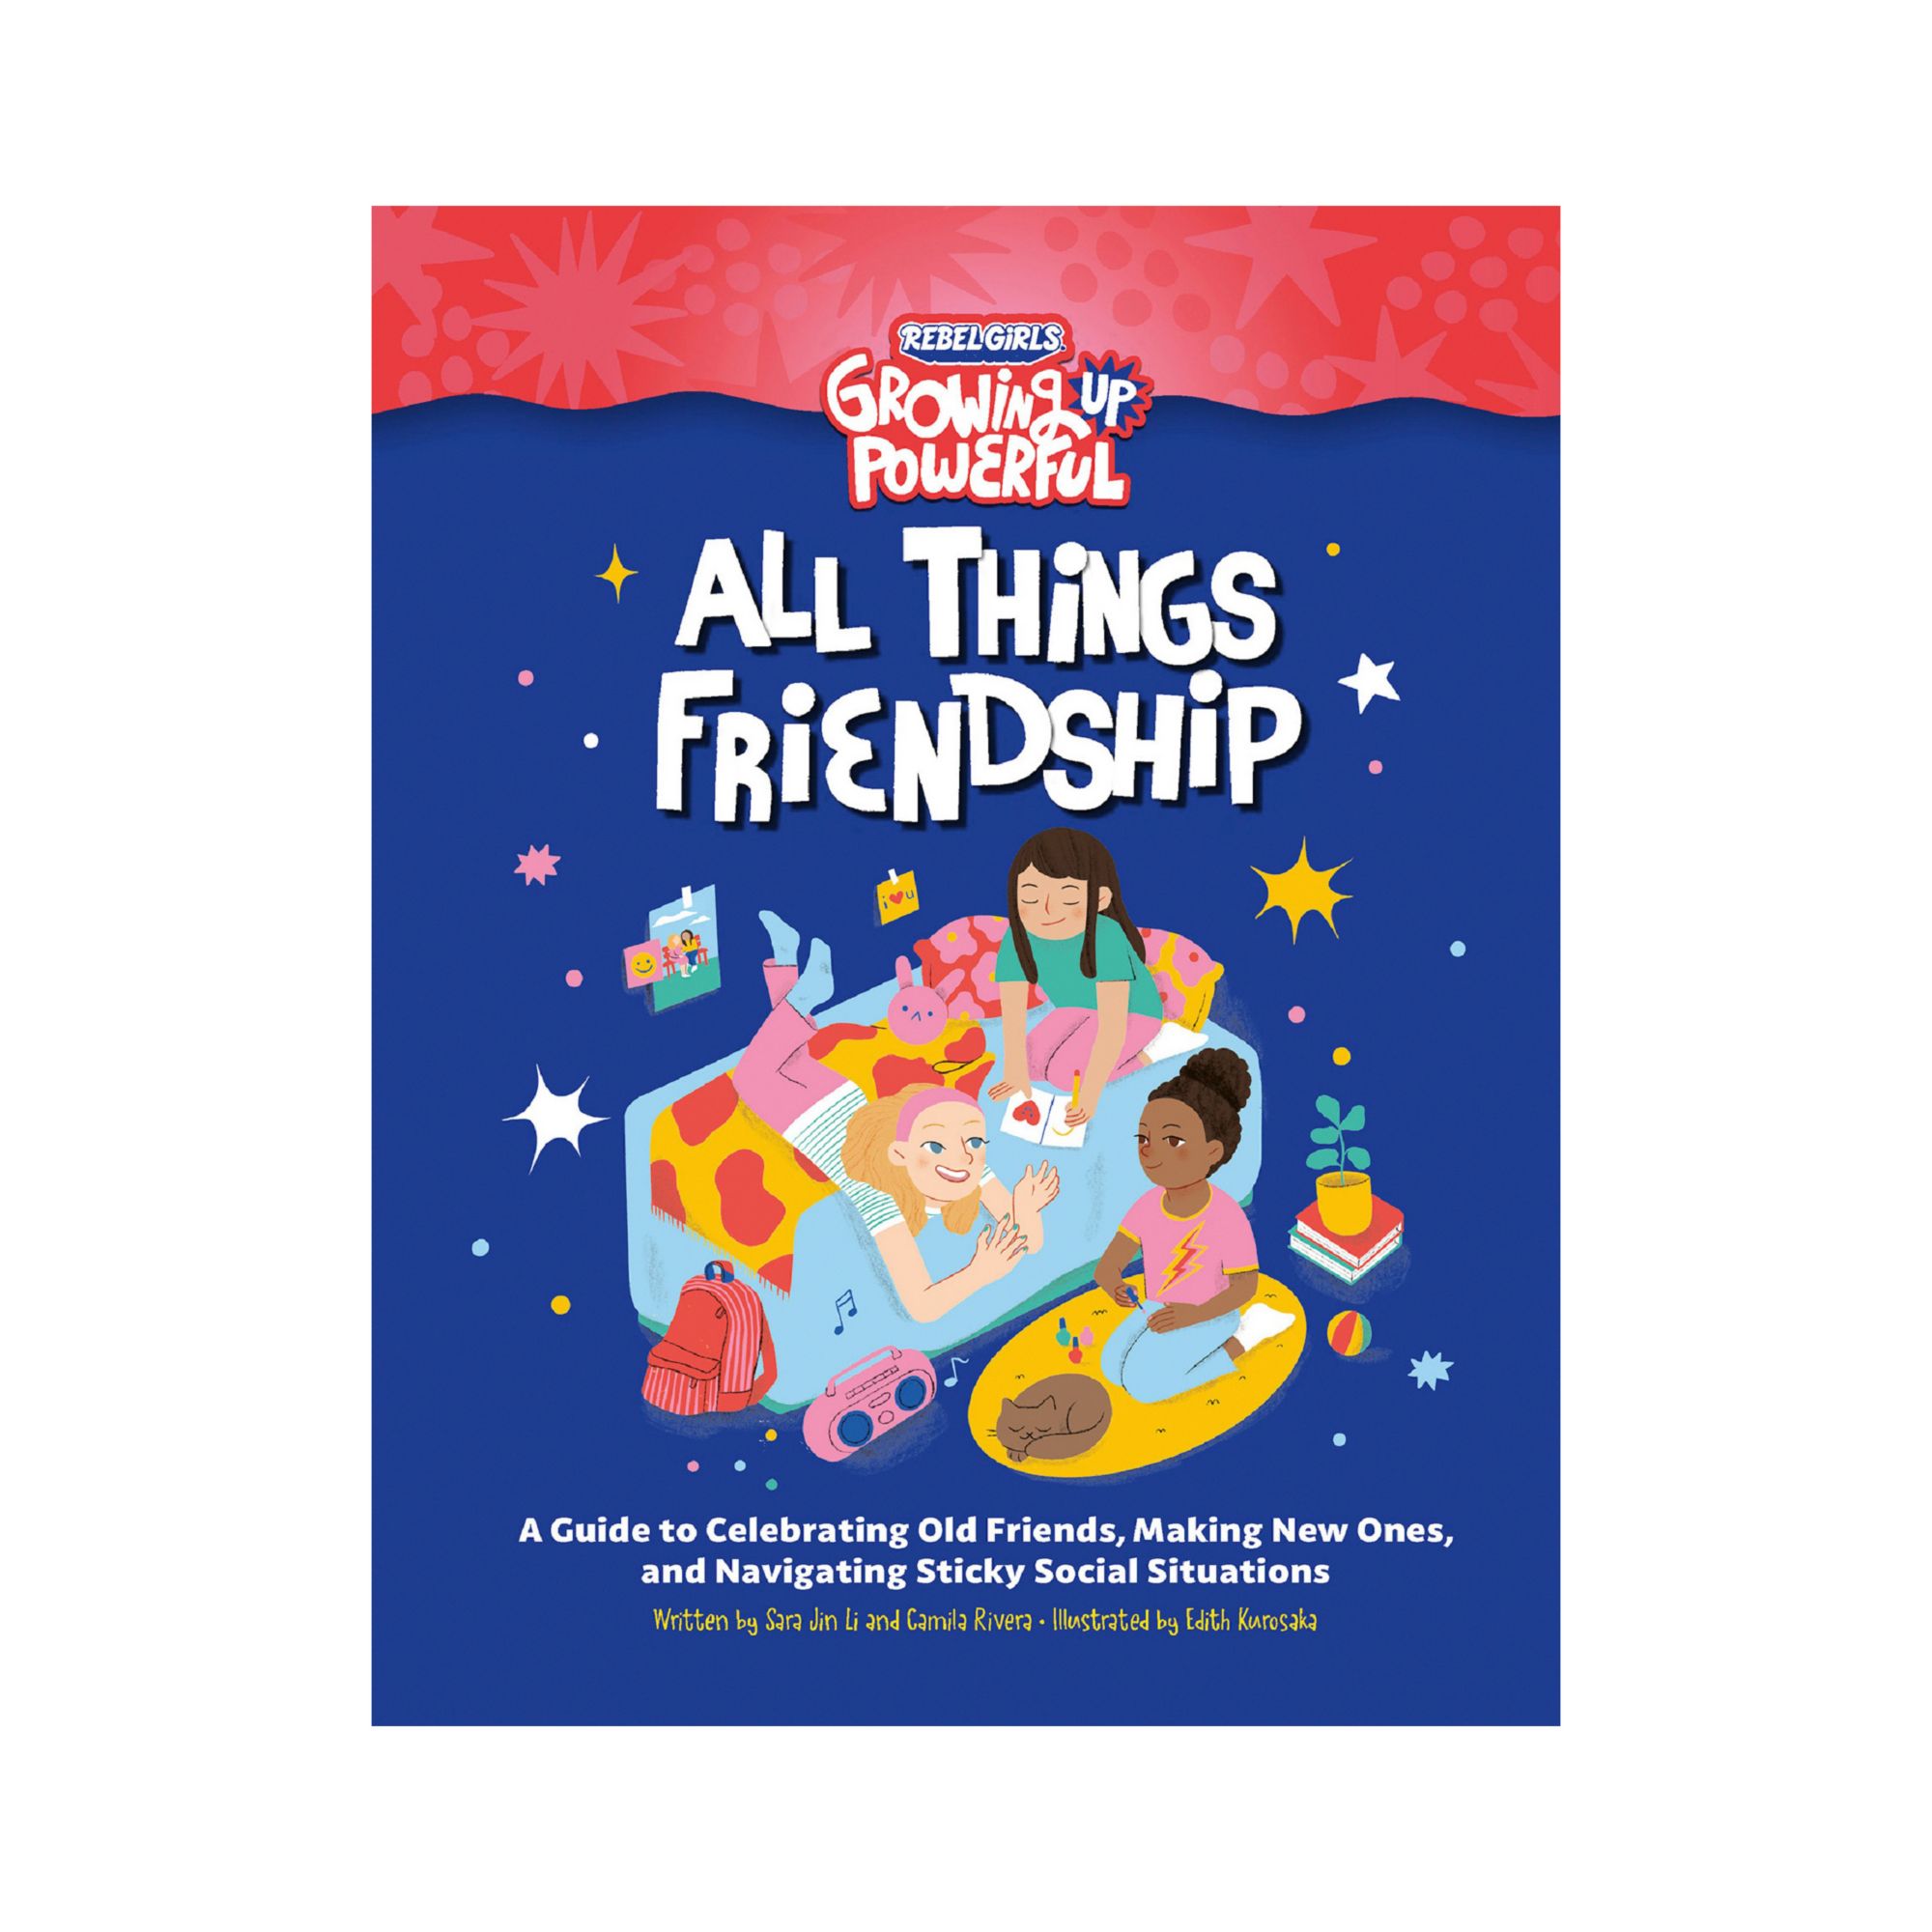 Rebel Girls All Things Friendship: A Guide to Celebrating Old Friends, Making New Ones, and Navigating Sticky Social Situation